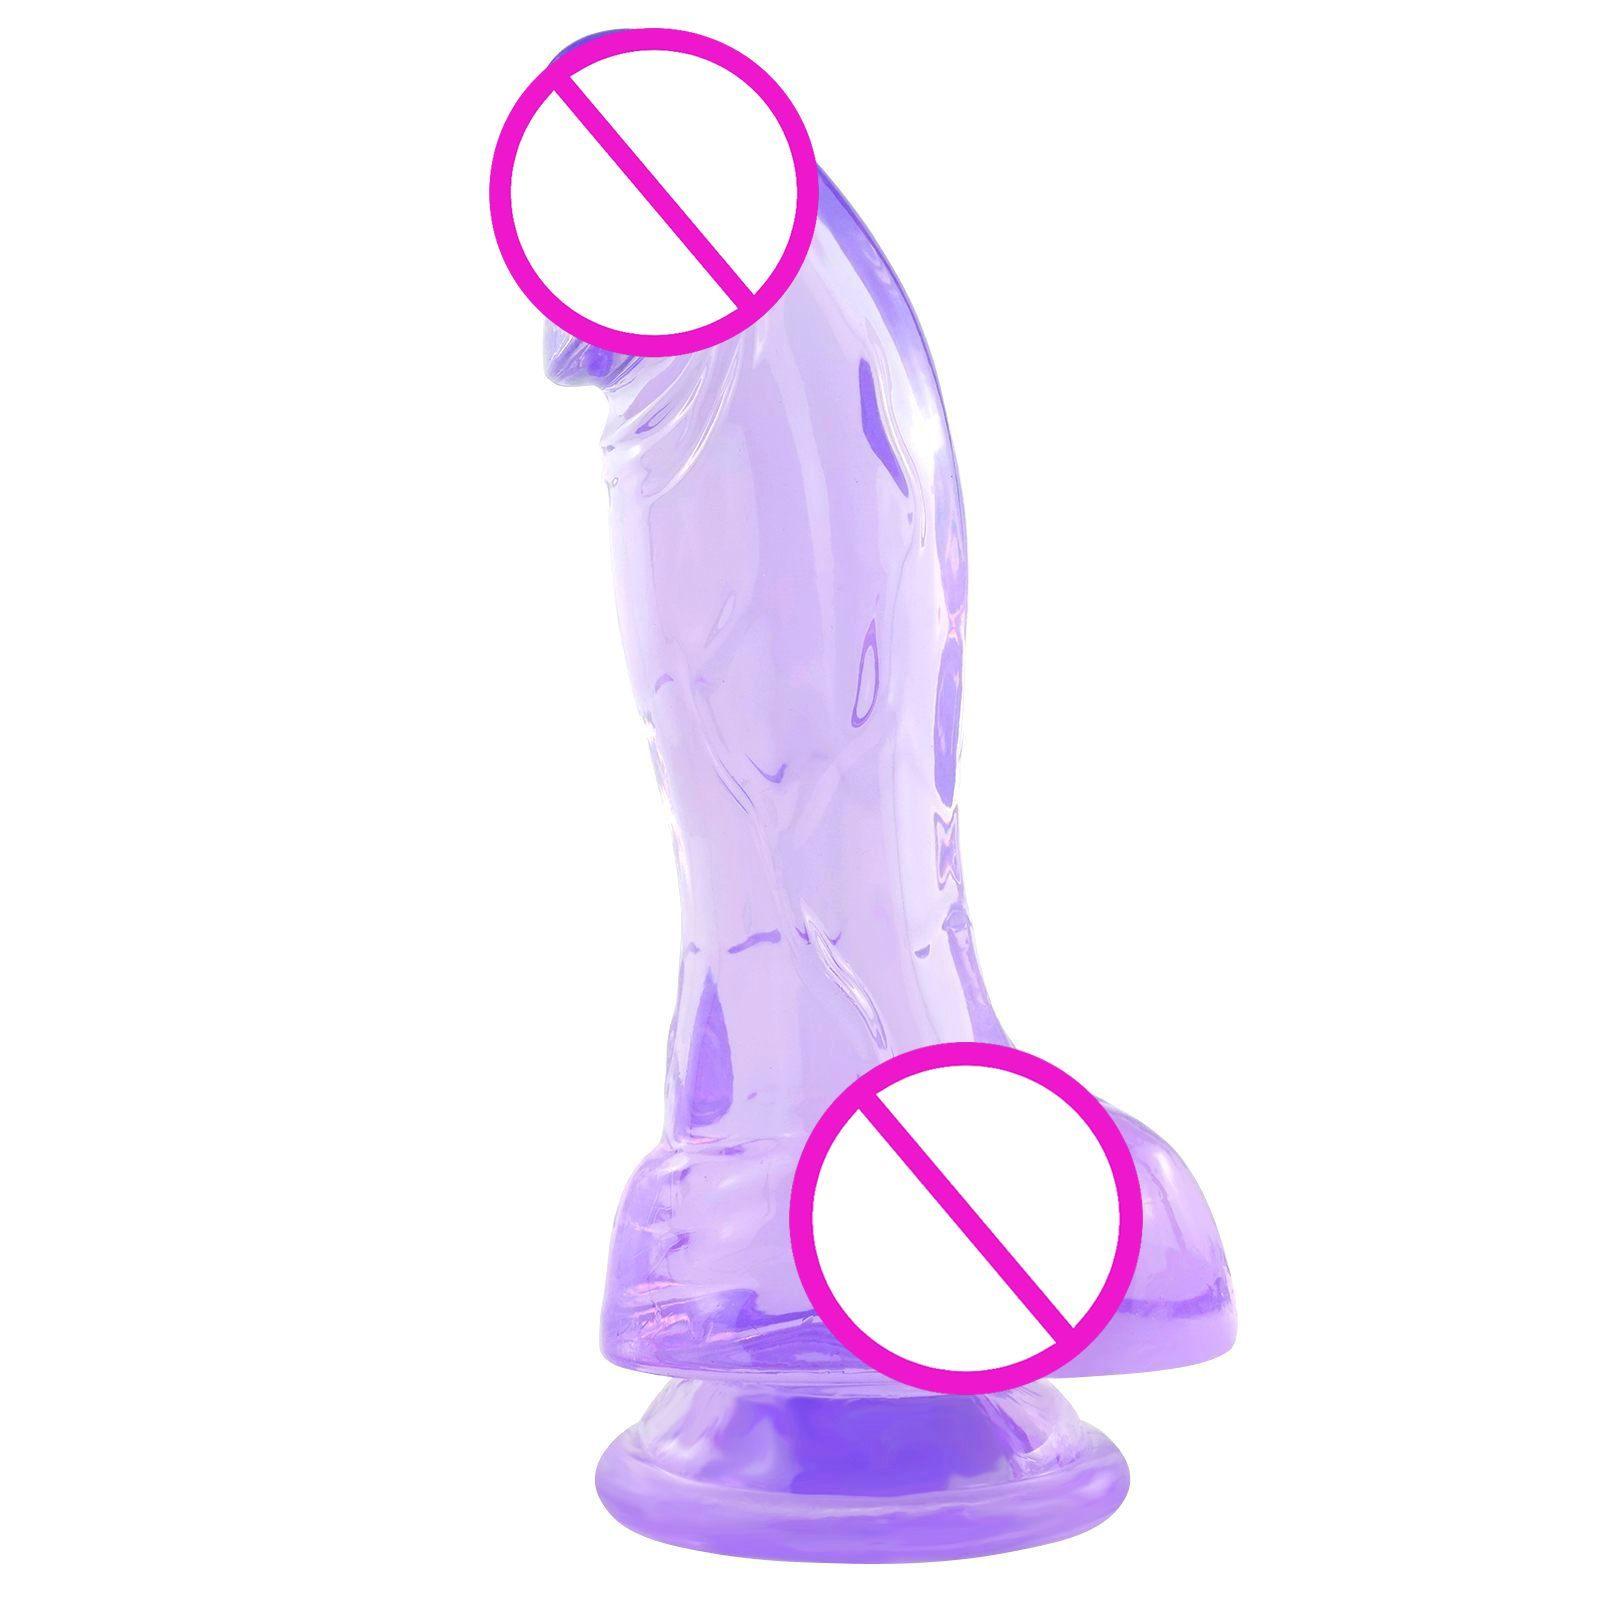 3colors 4sizes Realistic Jelly Dildo With Strong Suction Cup Vagina G-spot Stimulation Penis Adult Sex Toy For Women Men